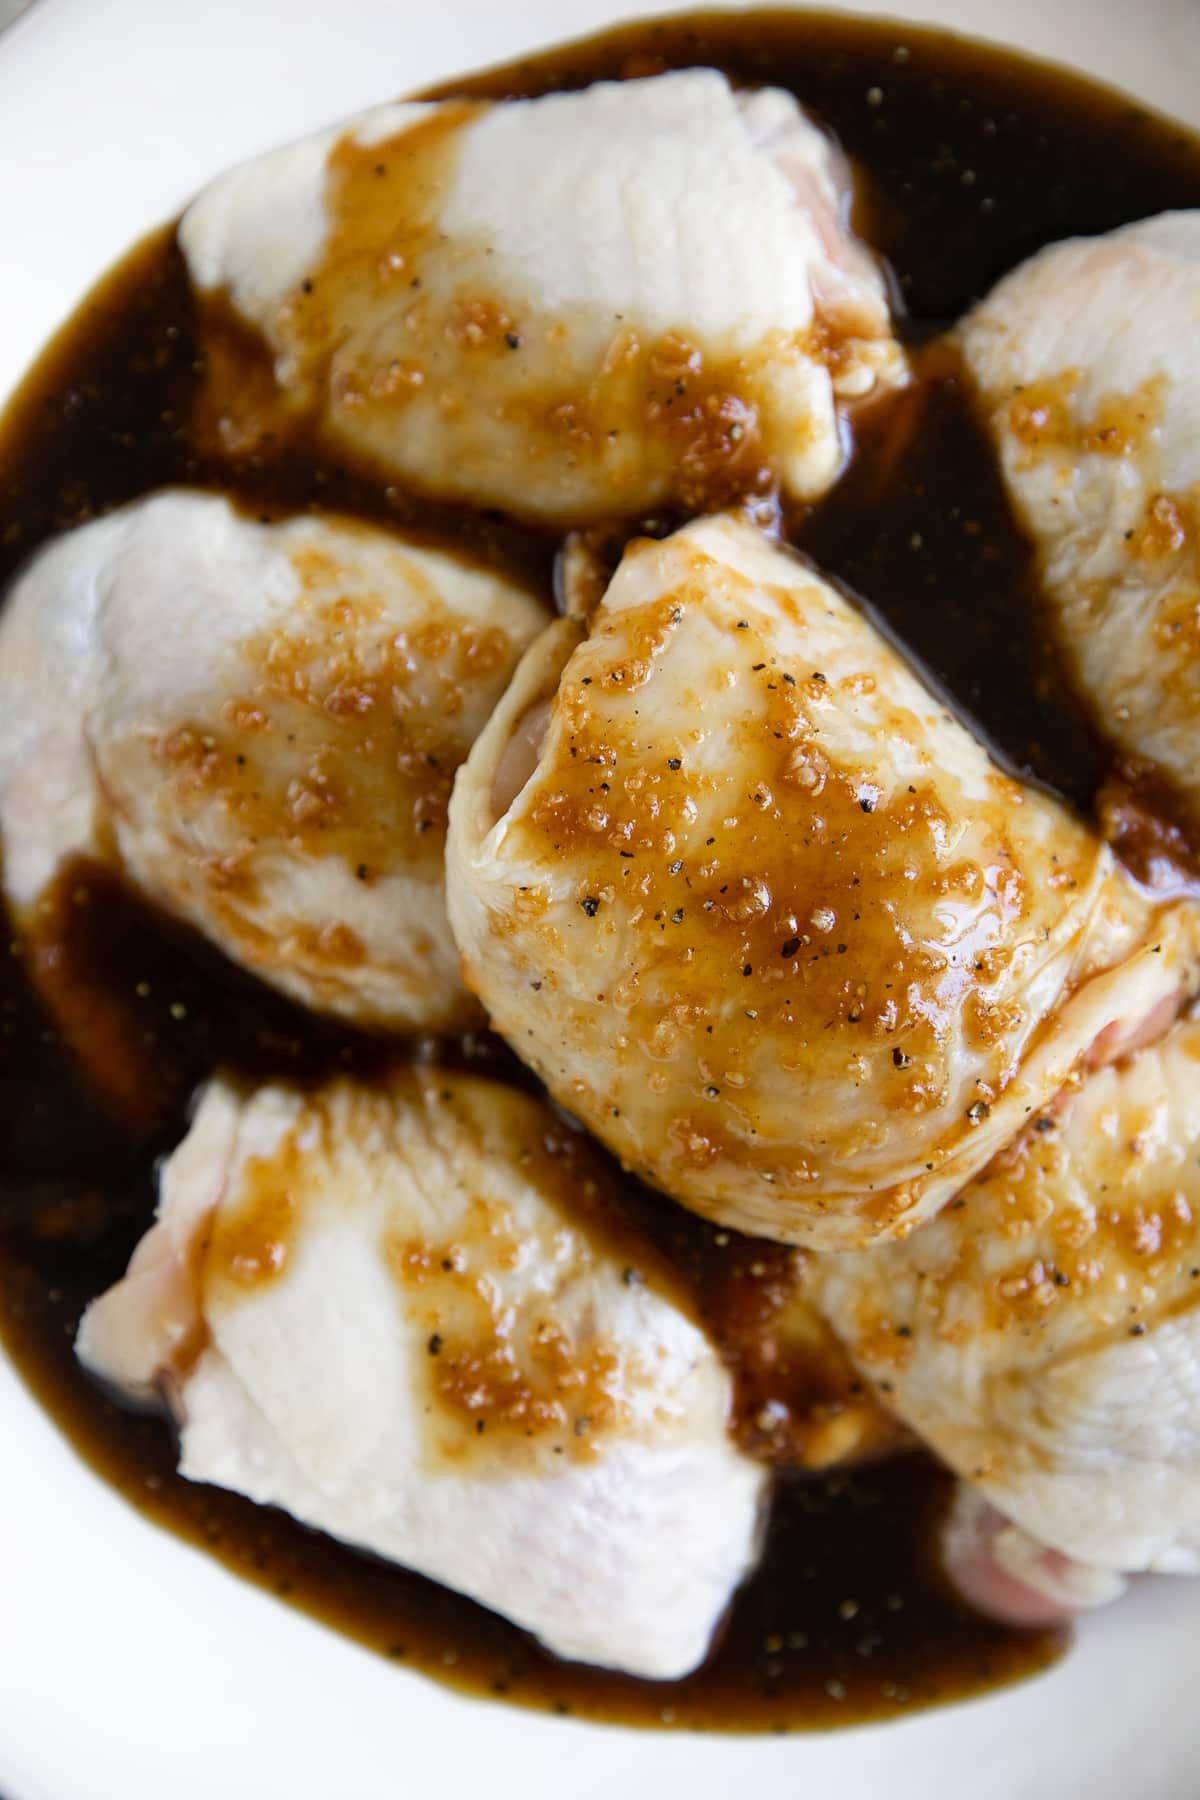 Large bone-in and skin-on chicken thighs placed in a large bowl filled with honey, soy, ginger, and garlic marinade.